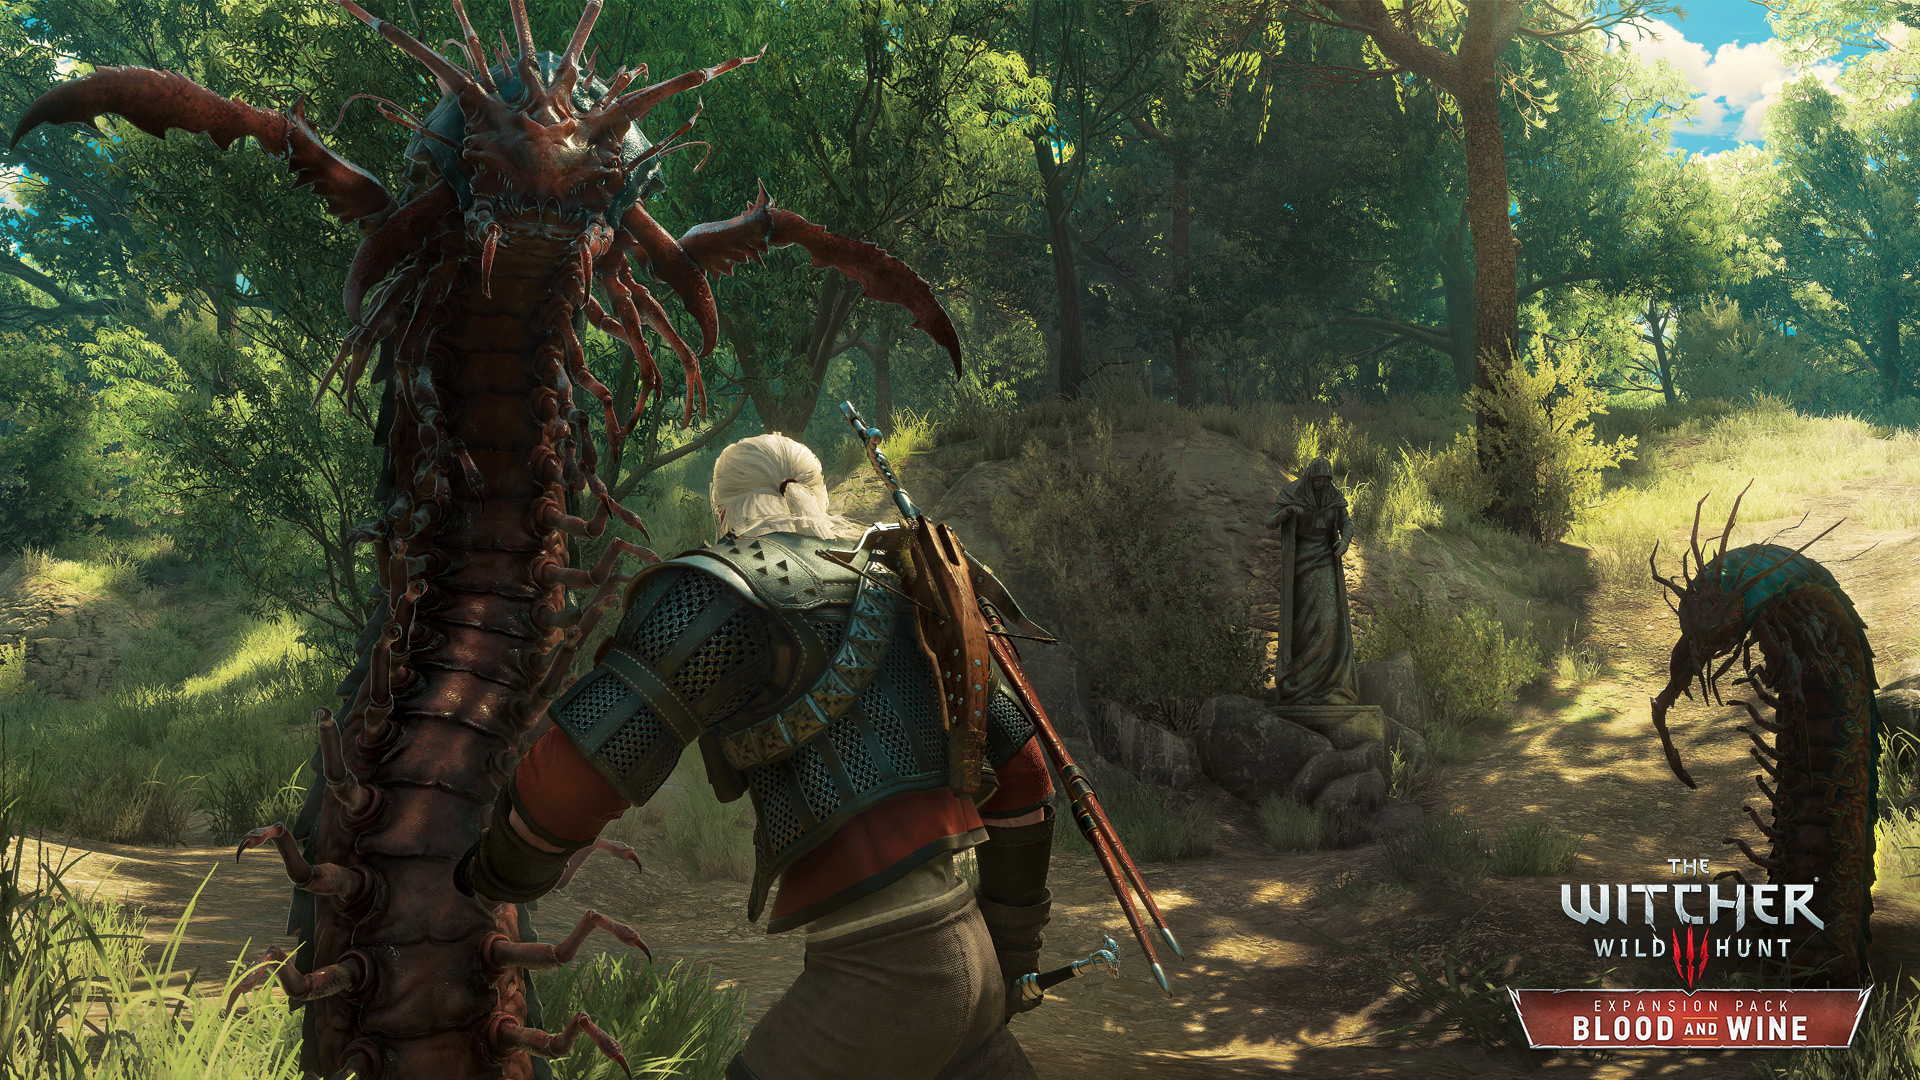 the witcher 3 blood and wine gameplay - devgam.com